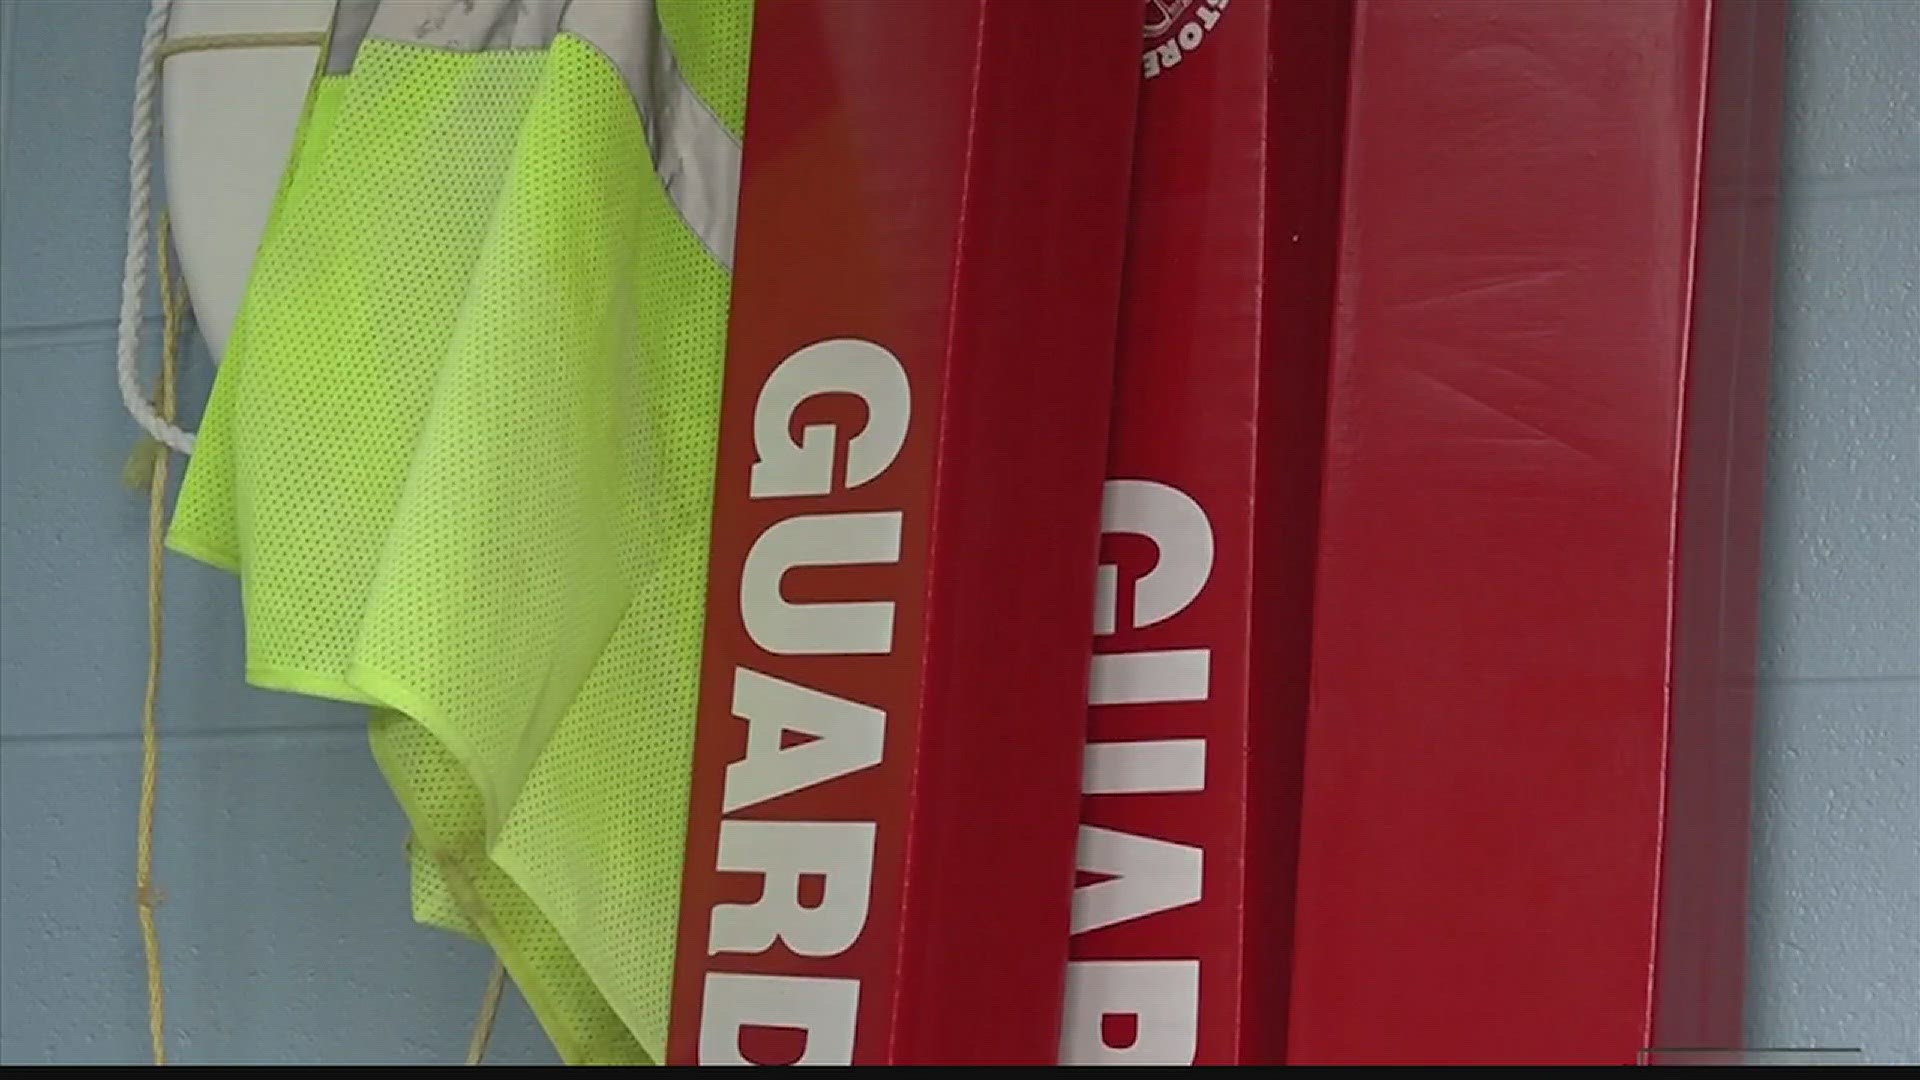 The city of Huntsville is looking to hire lifeguards in the area to meet this growing need.